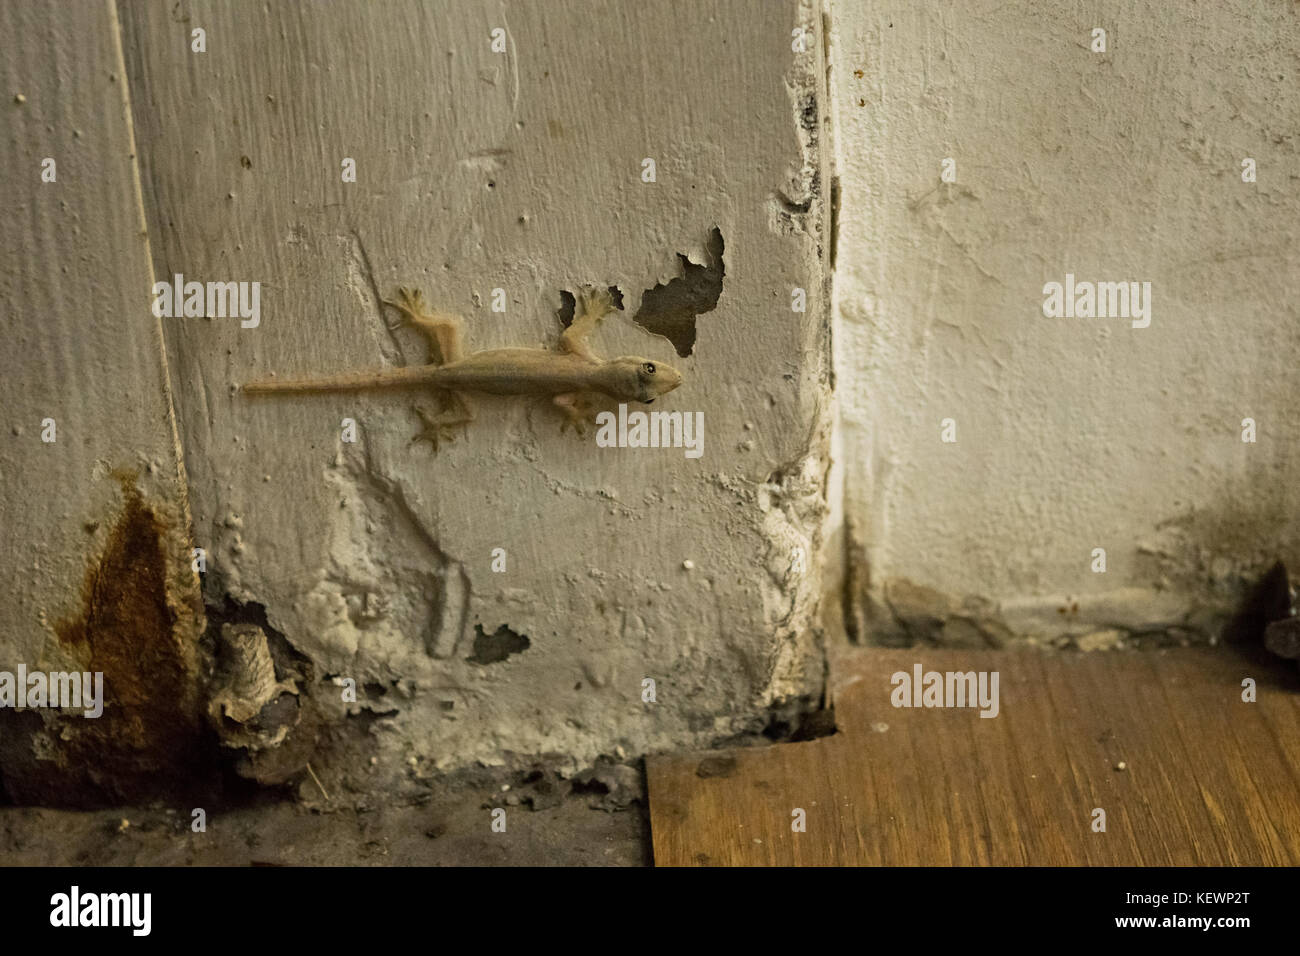 Asianreptile Common house gecko, Hemidactylus frenatus, hanging on stuck to a white wall of a house in Phnom Penh, Cambodia, South East Asia Stock Photo